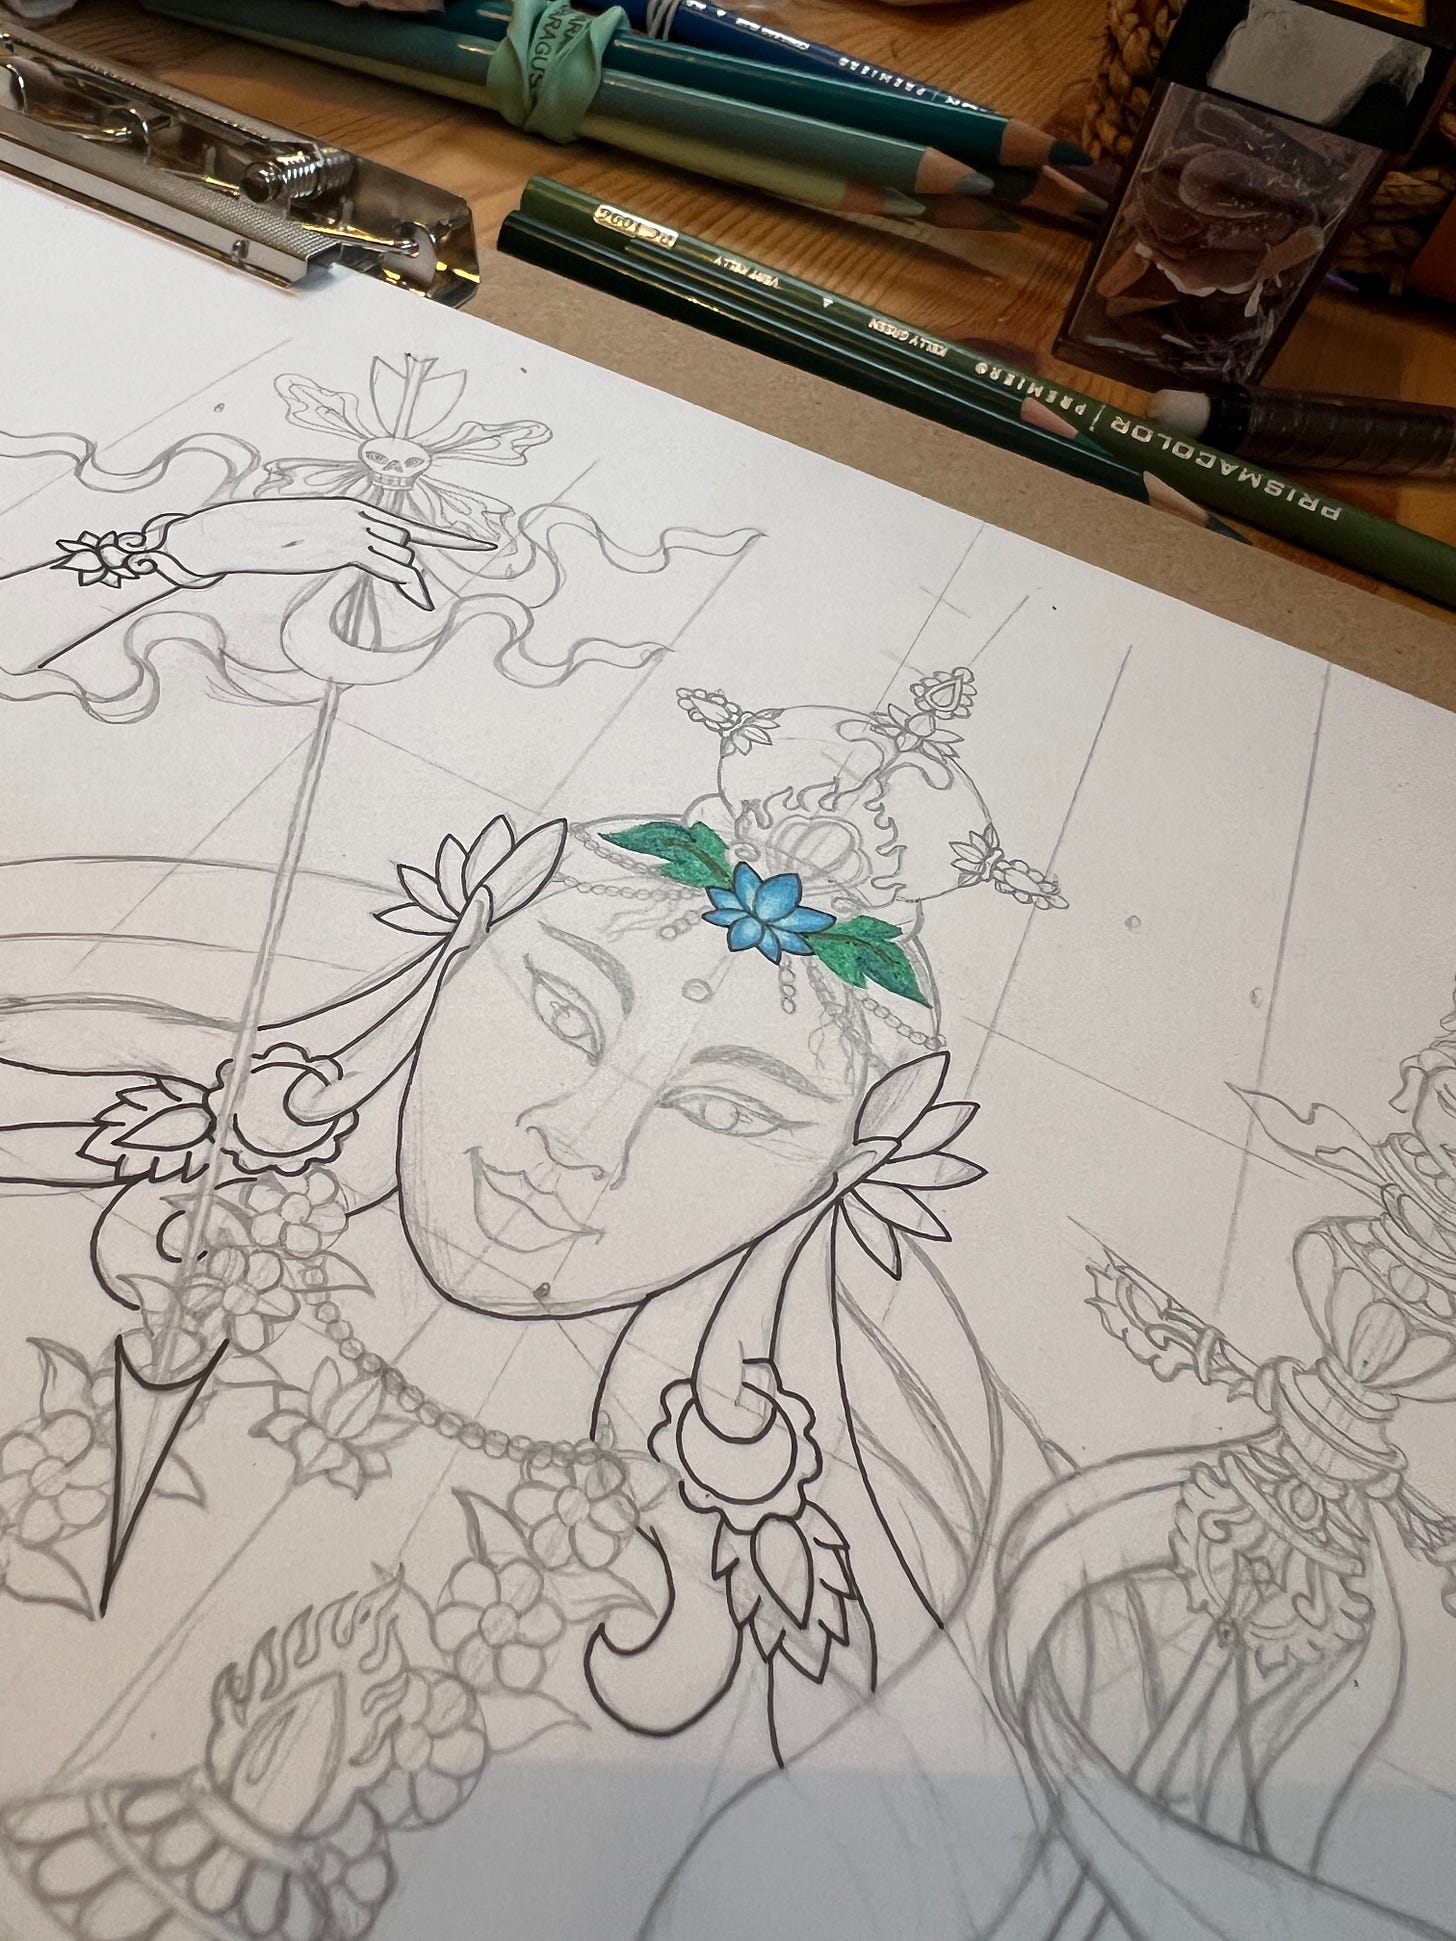 A progress photo I took of Princess Mandarava the day I started to add colour to the image. The photo captures the figure from the top half, their face partially outlined in fine line black ink. They have a lotus flower in the middle of their forehead, which has been coloured in blue, with green leaves either side of it. 